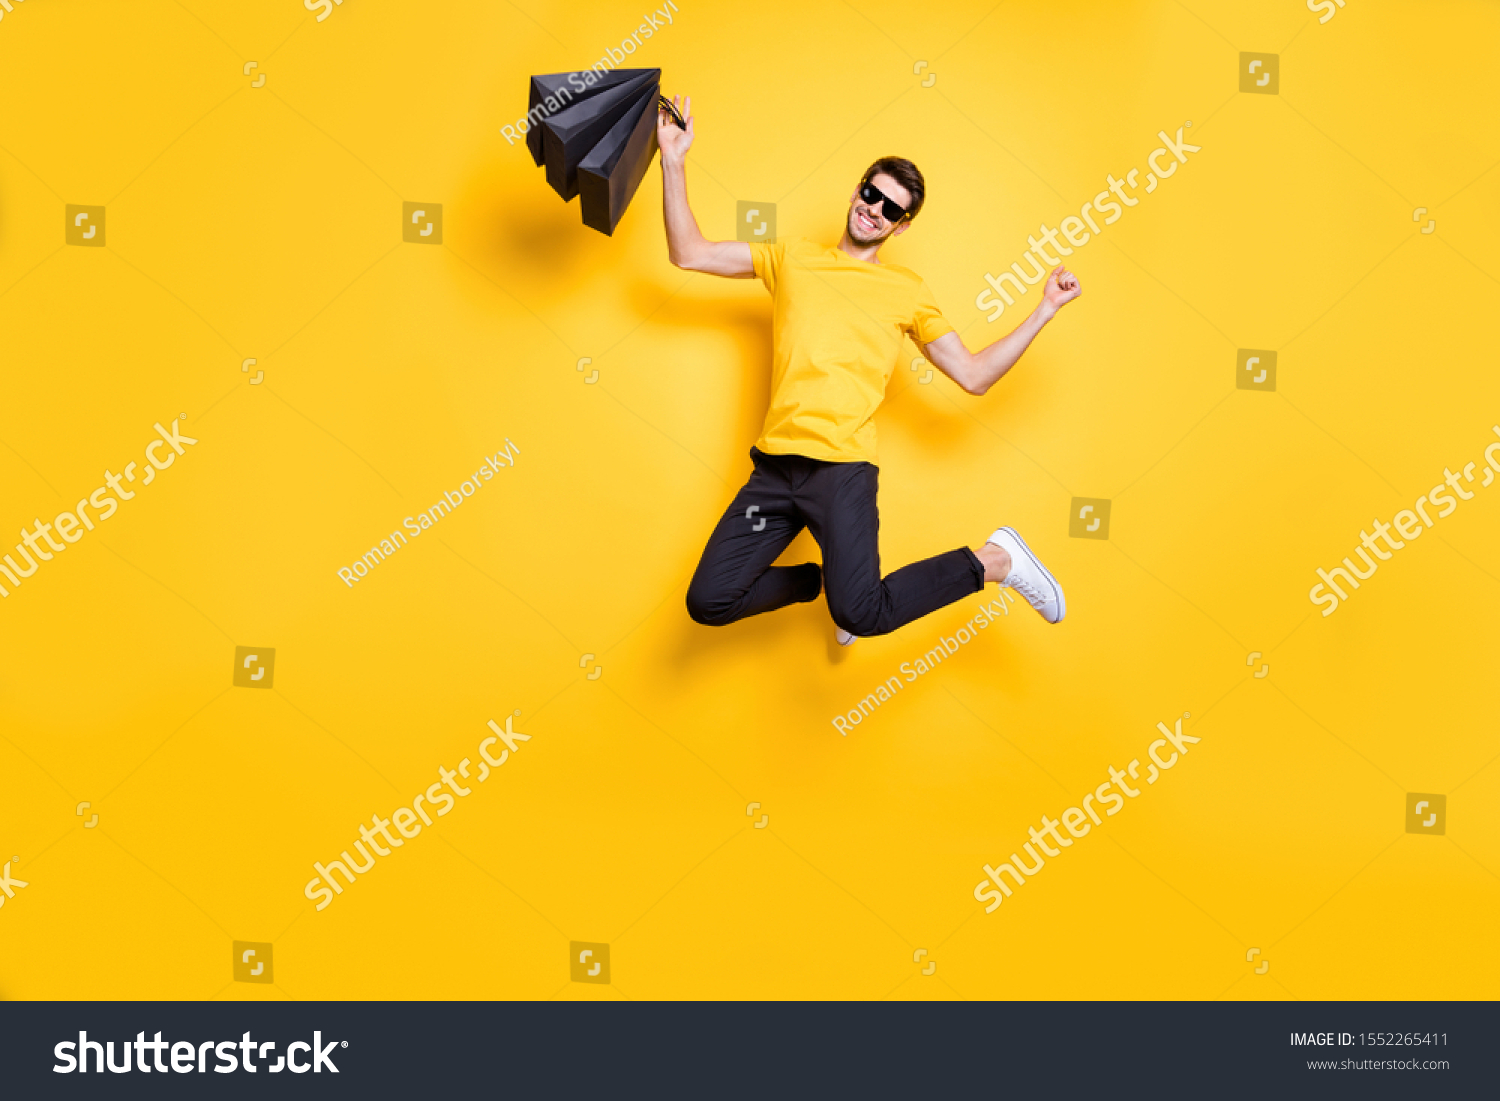 Full Size Photo Handsome Guy Jumping Stock Photo 1552265411 | Shutterstock